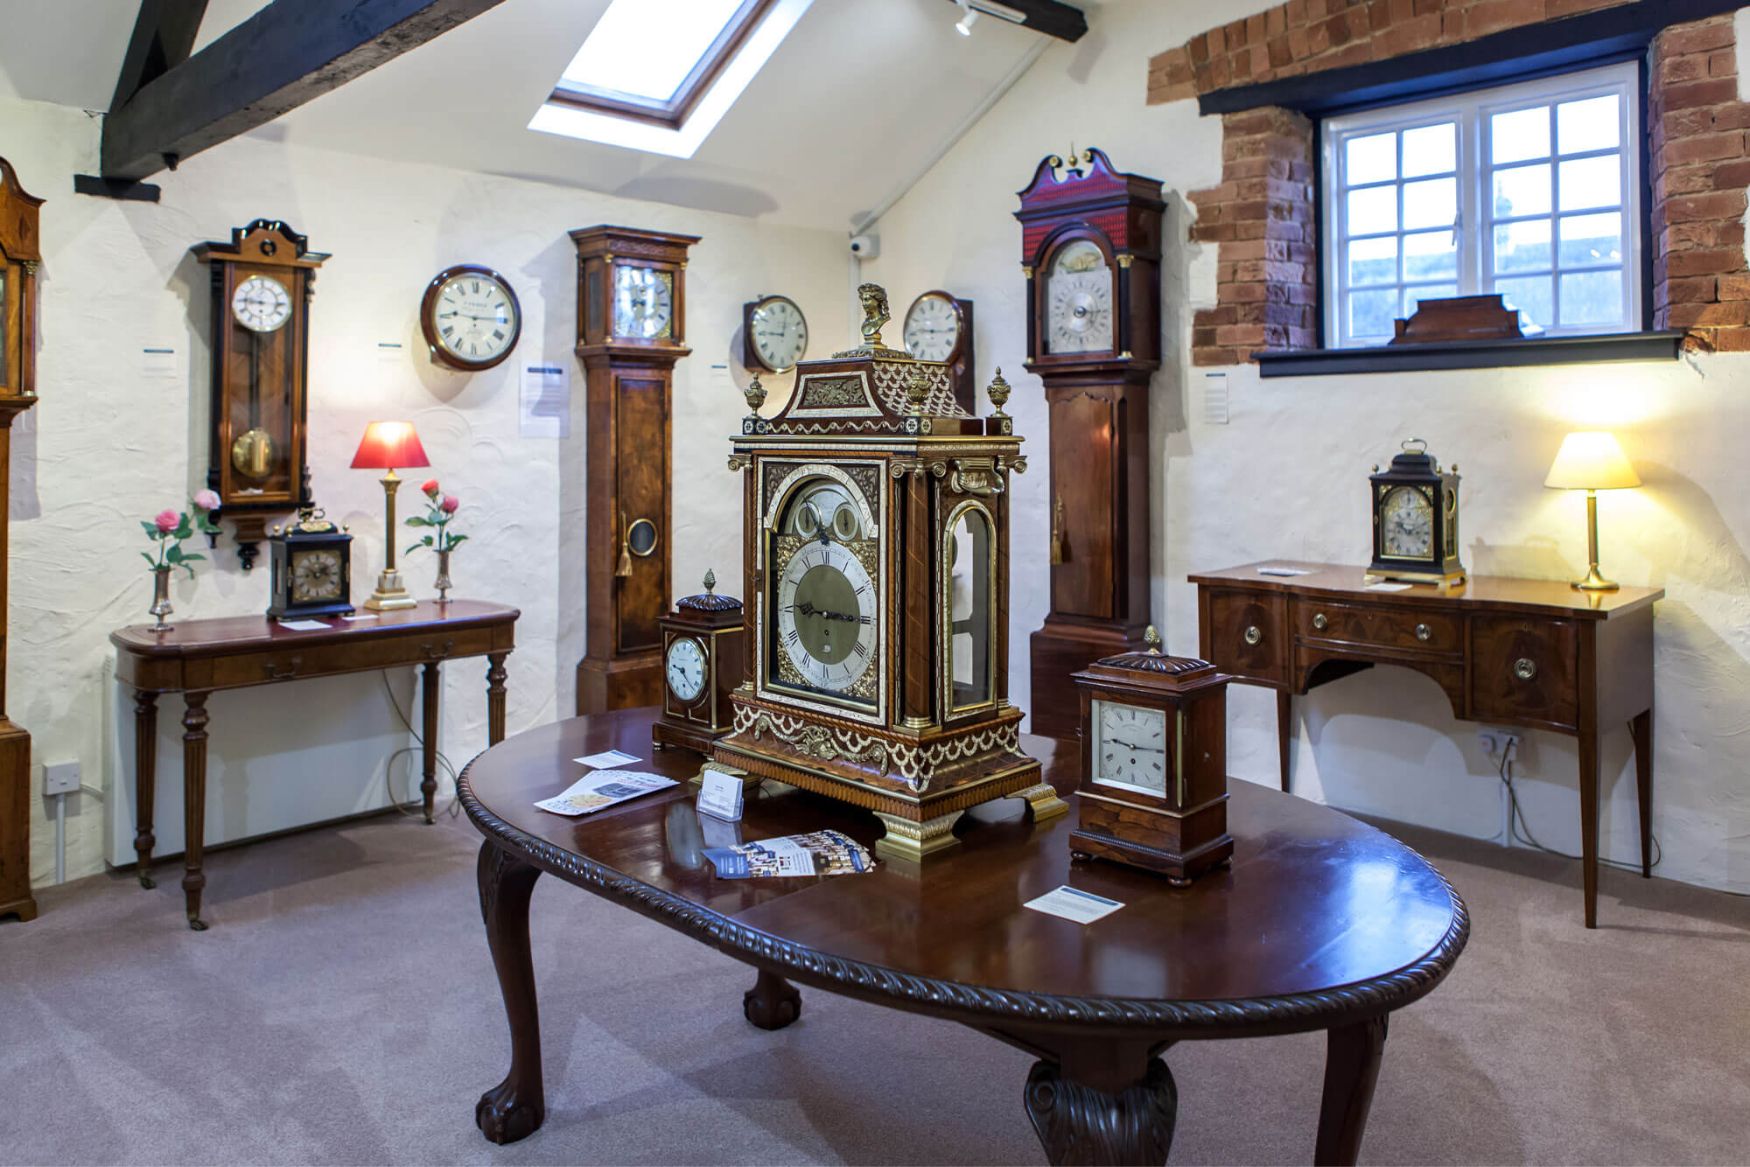 Vintage Clock Manufacturers: Learn About Top Brands And Their History